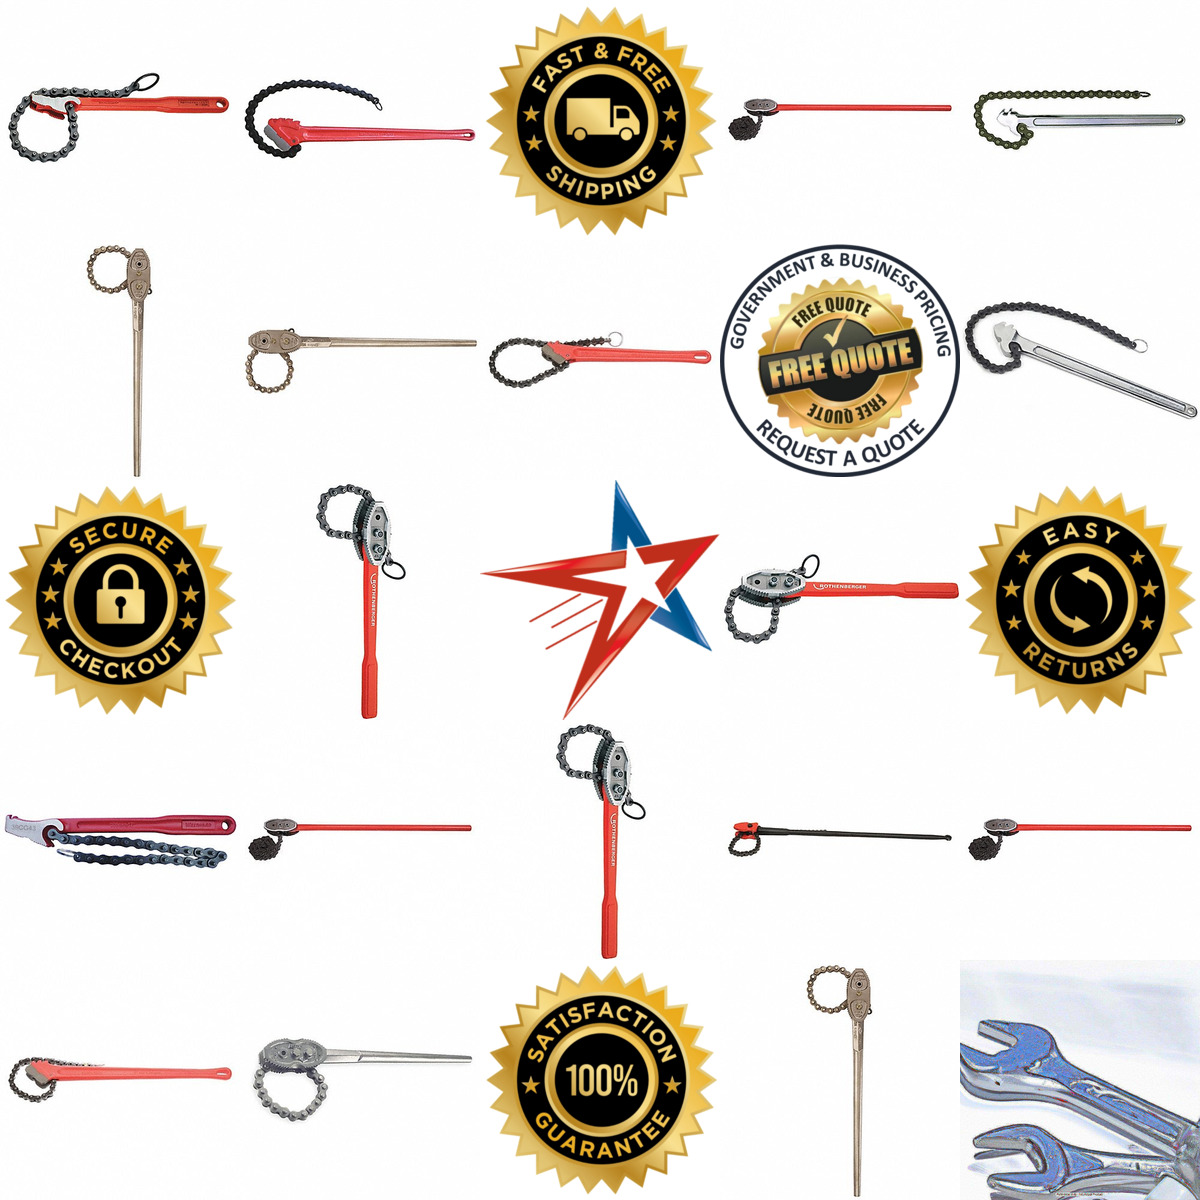 A selection of Chain Wrenches and Tongs products on GoVets